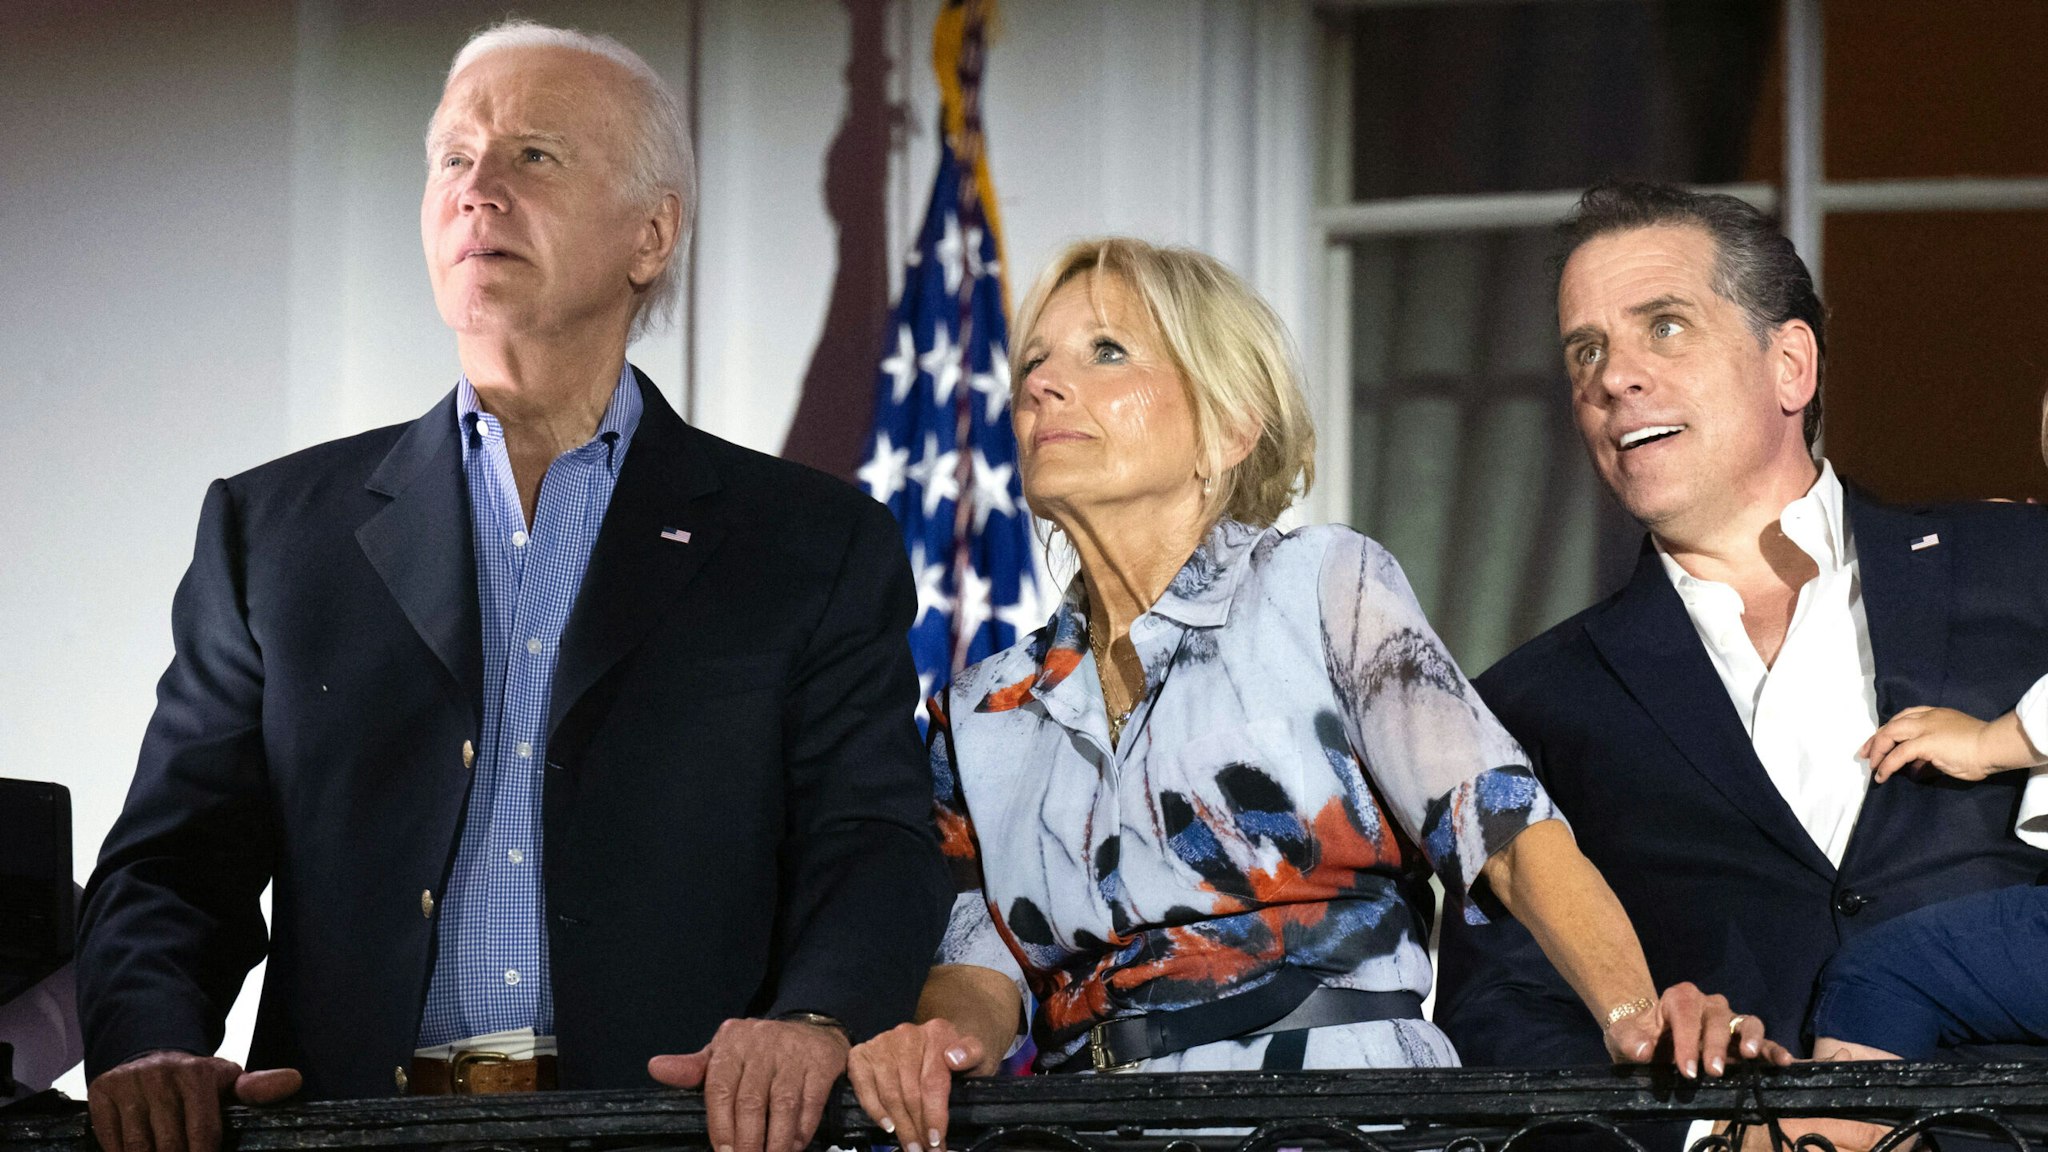 US President Joe Biden, First Lady Jill Biden and Hunter Biden with his son Beau watch the Independence Day fireworks display from the Truman Balcony of the White House in Washington, DC, on July 4, 2023.